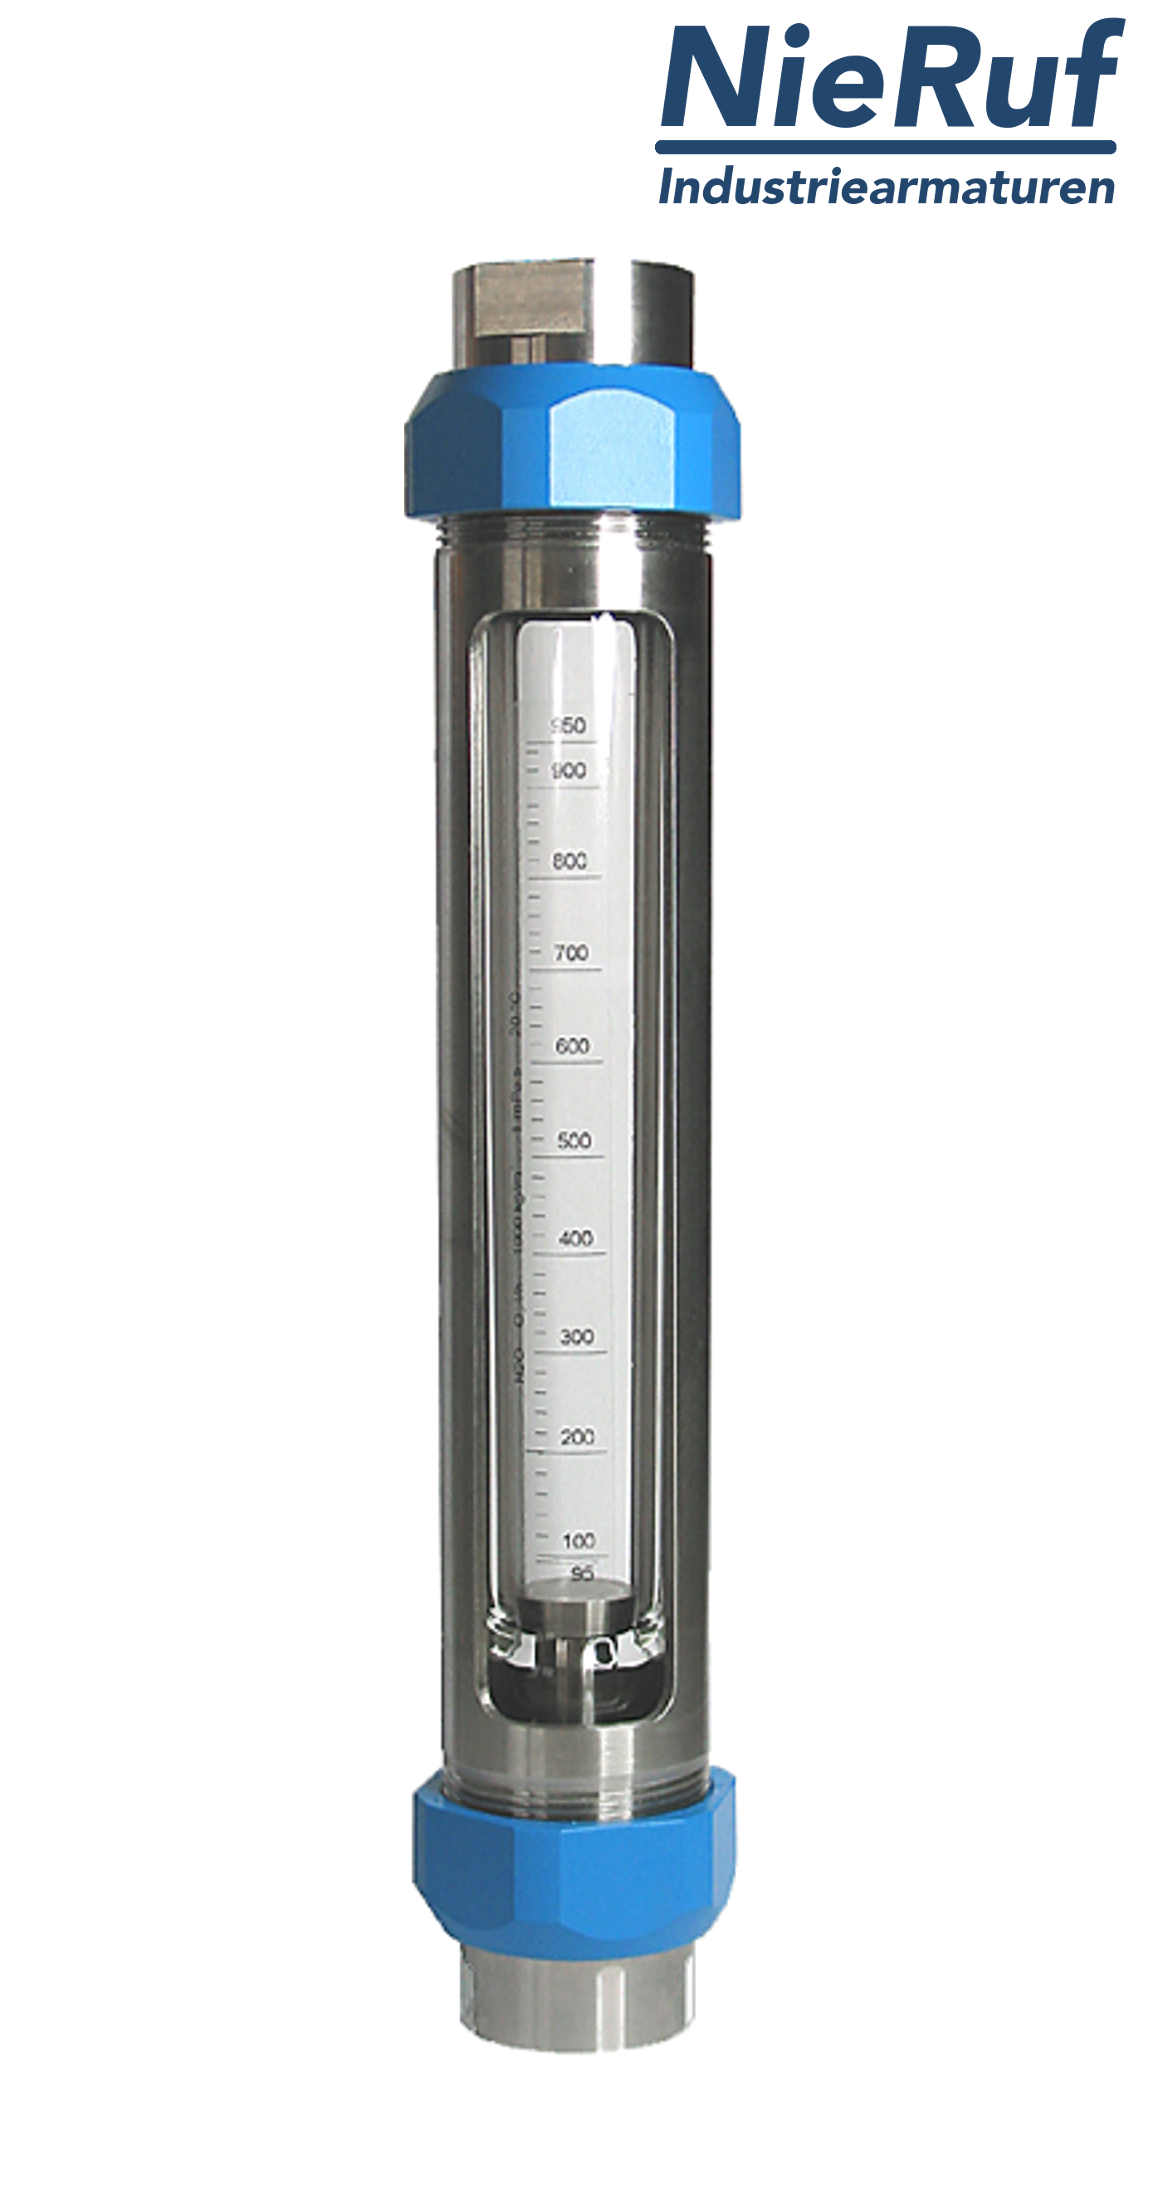 Variable area flowmeter stainless steel + borosilicate 1/4" inch 5.0 - 50.0 l/h water FKM